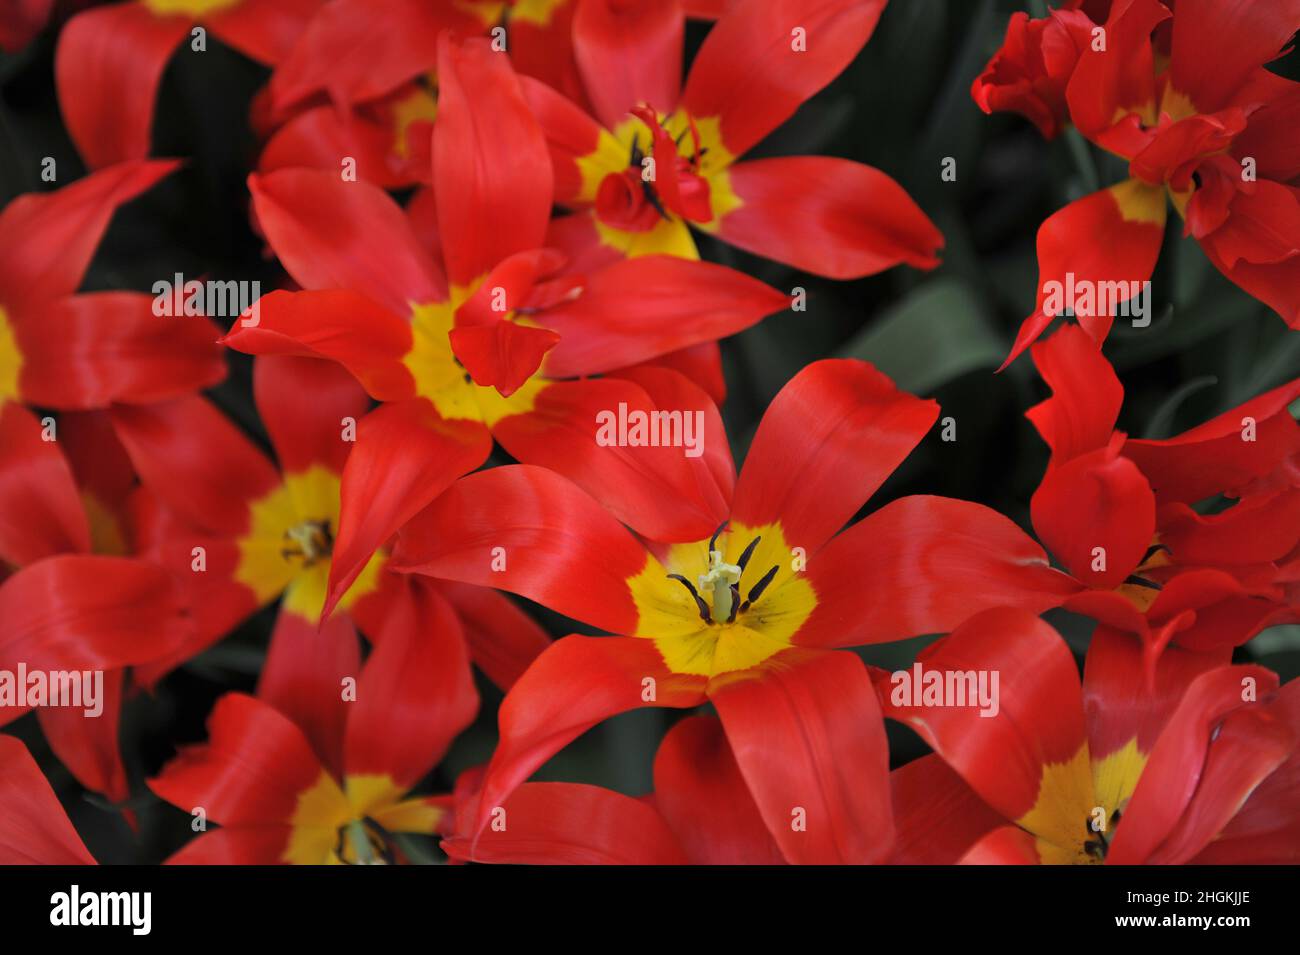 Red lily-flowered tulips (Tulipa) Istanbul bloom in a garden in April Stock Photo